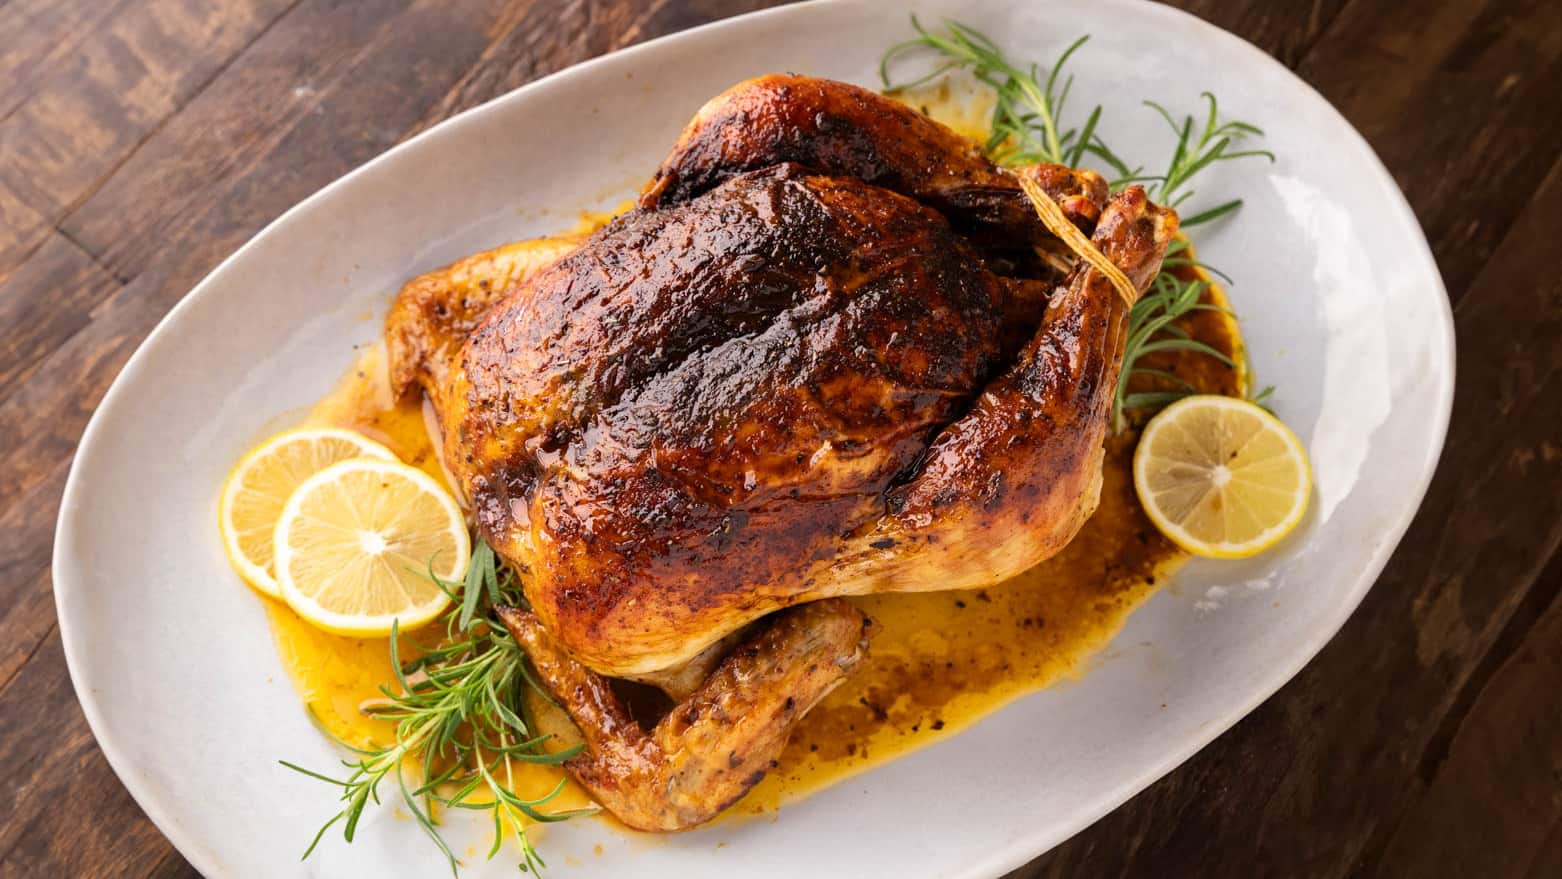 How to make Pan-Roasted Chicken for weight loss